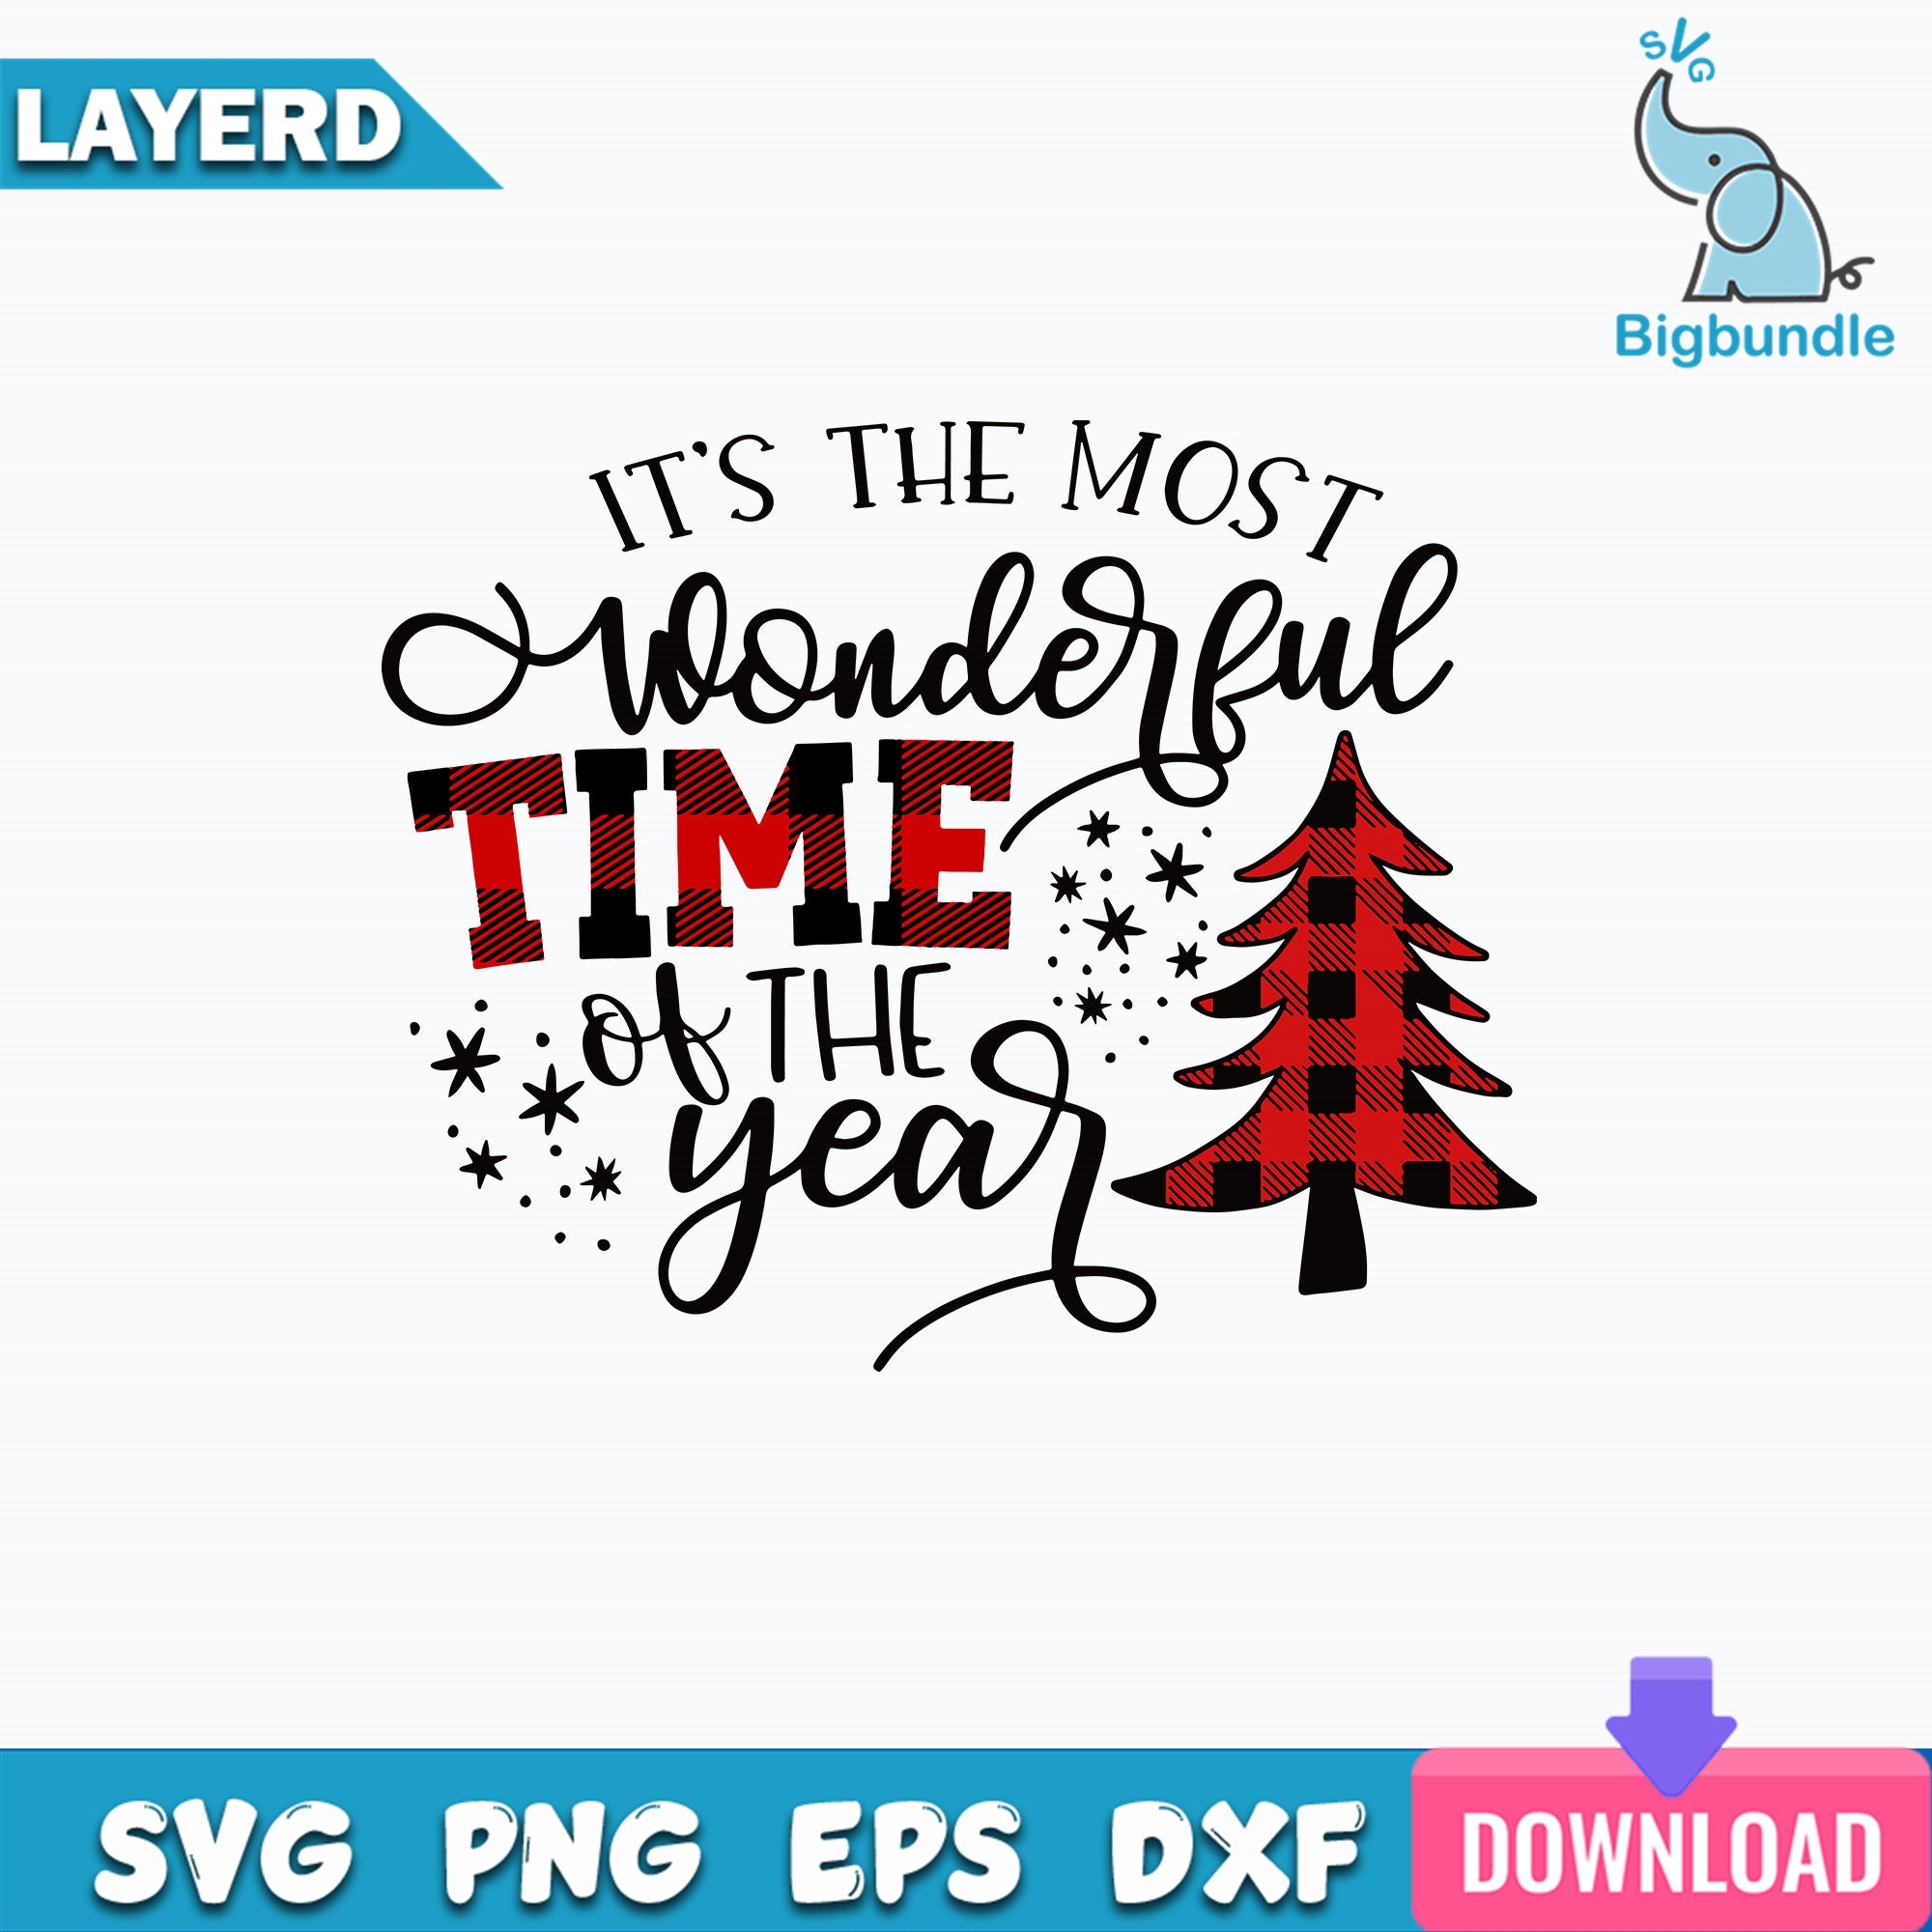 It's The Most Wonderful Time Of The Year SVG, Christmas SVG, Holidays SVG